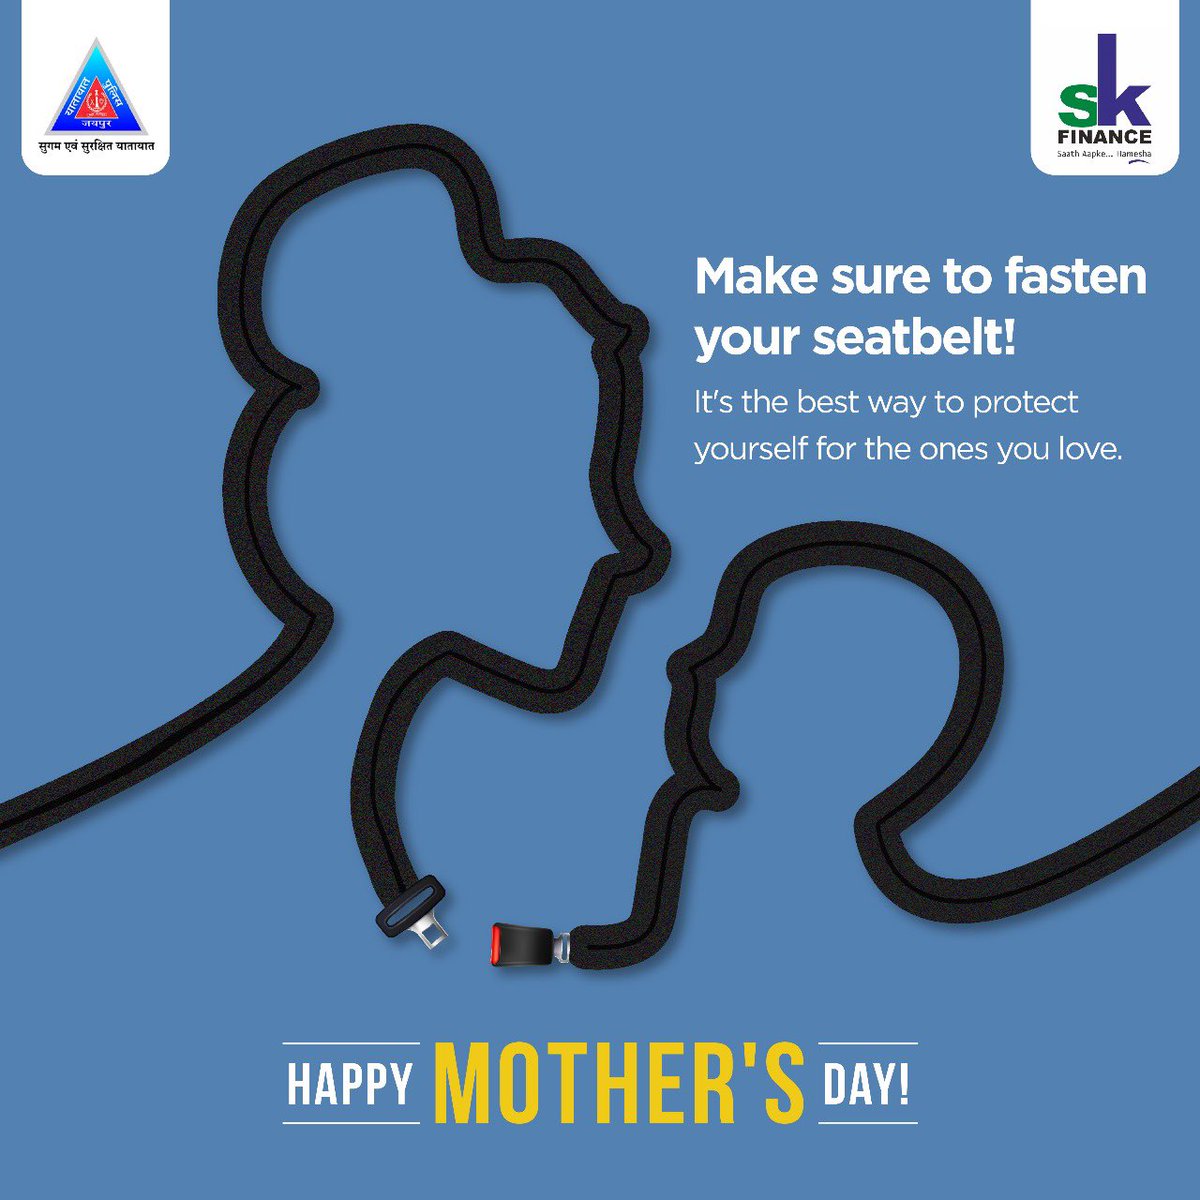 To the woman who taught me to navigate life's road with caution and care. 🚗👩‍👧

Happy Mother's Day!

#JaipurTrafficPolice #DriveSafe #SafetyFirst #FollowTrafficRules #MothersDay #MomKnowsBest #MotherCare #TravelSafe